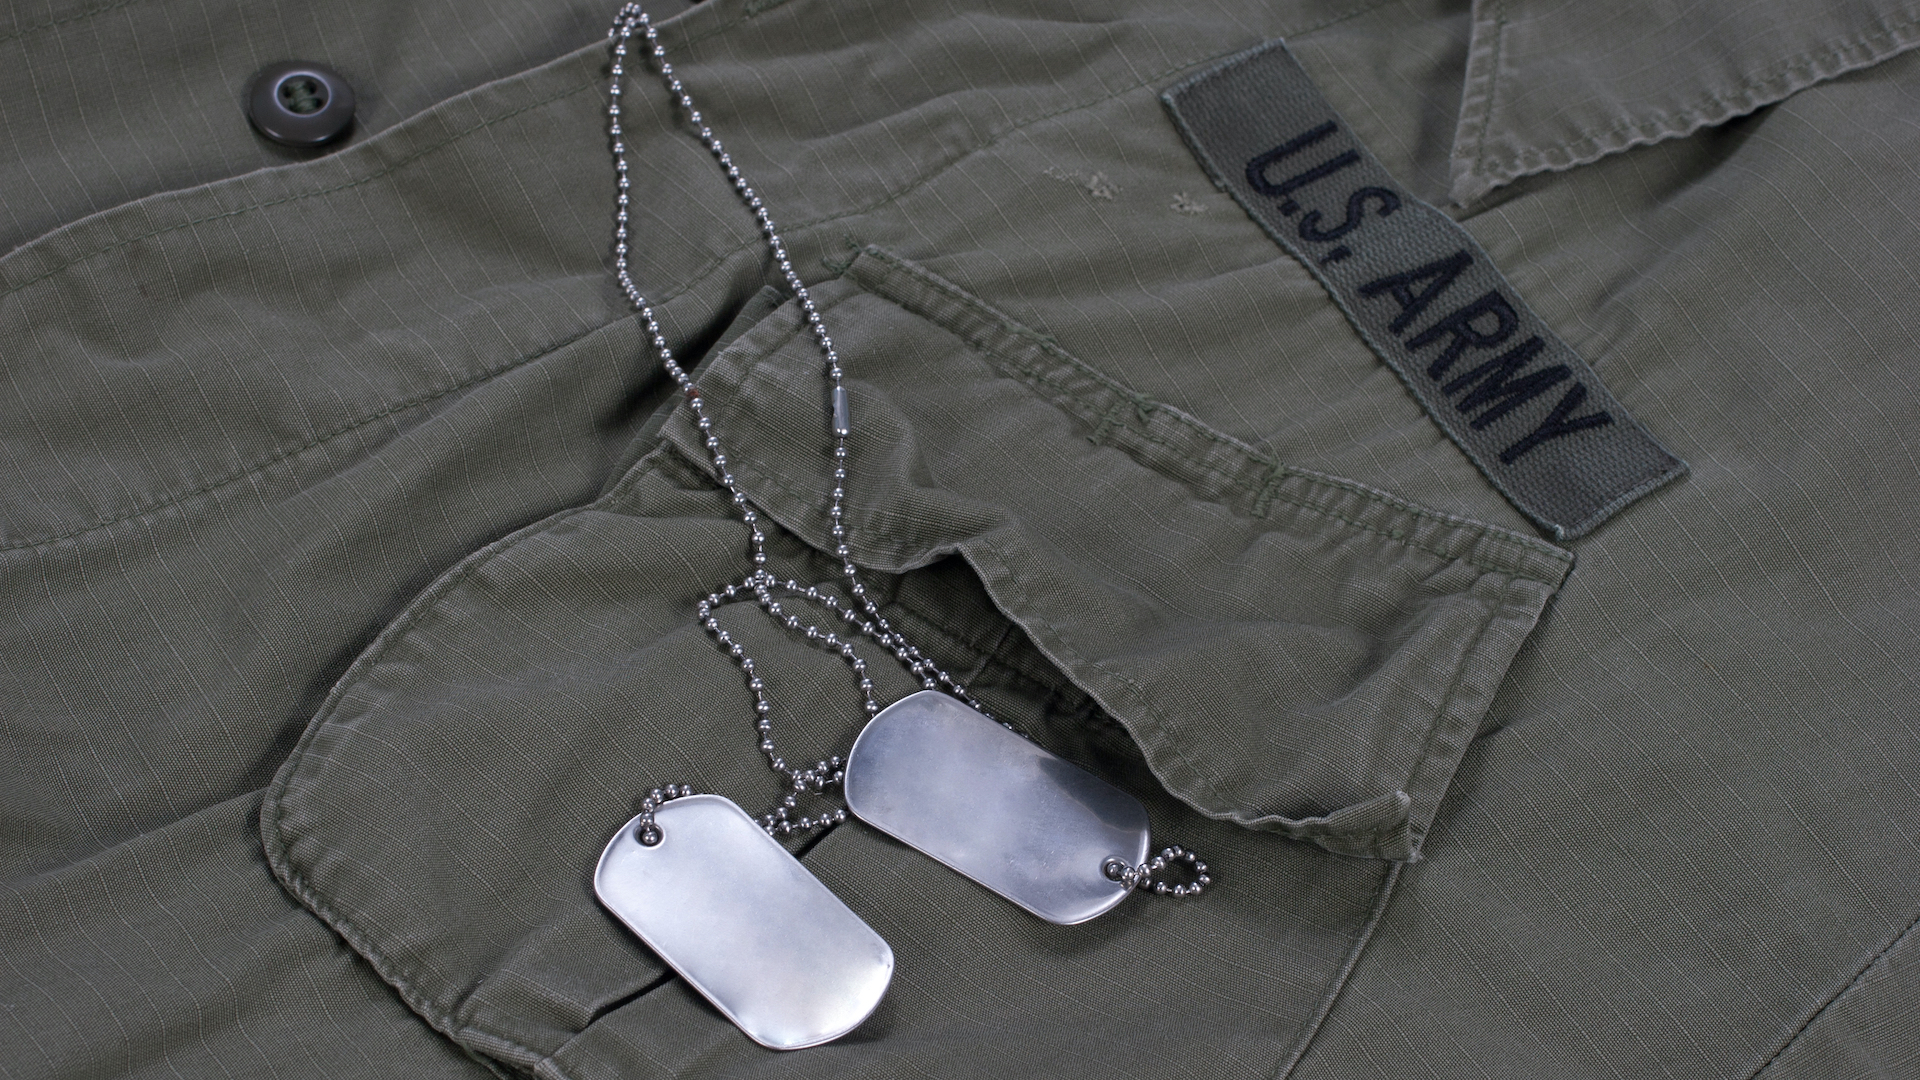 A US soldier shirt and dog tags